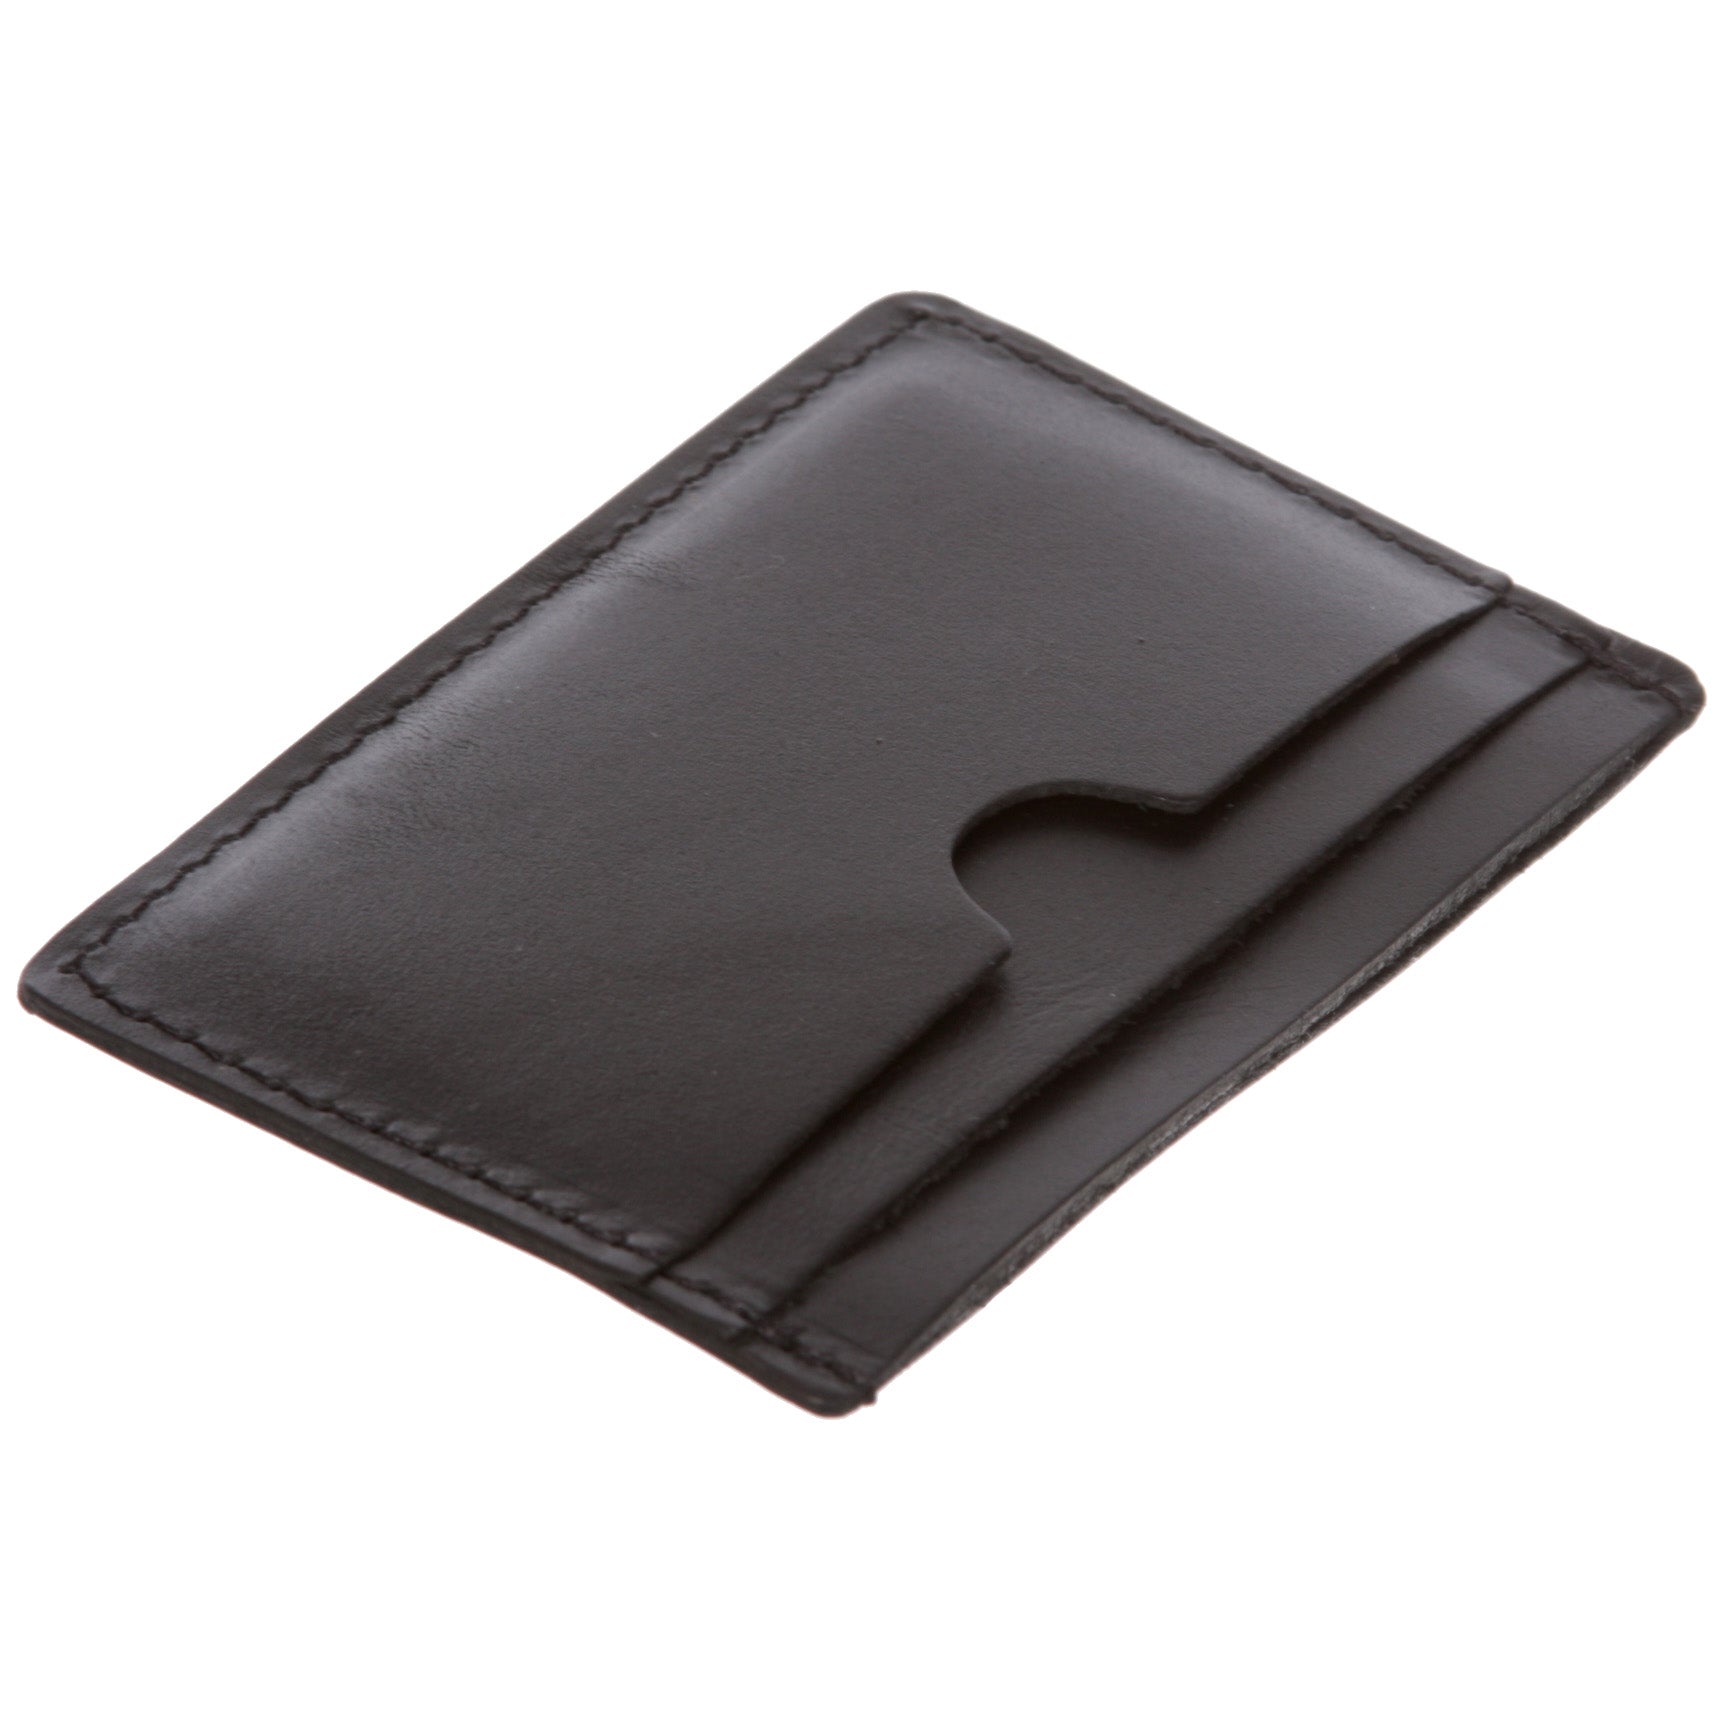 Micro Sleeve, Slim Leather Card & Cash Holder Wallet (Max. 3 cards and cash)